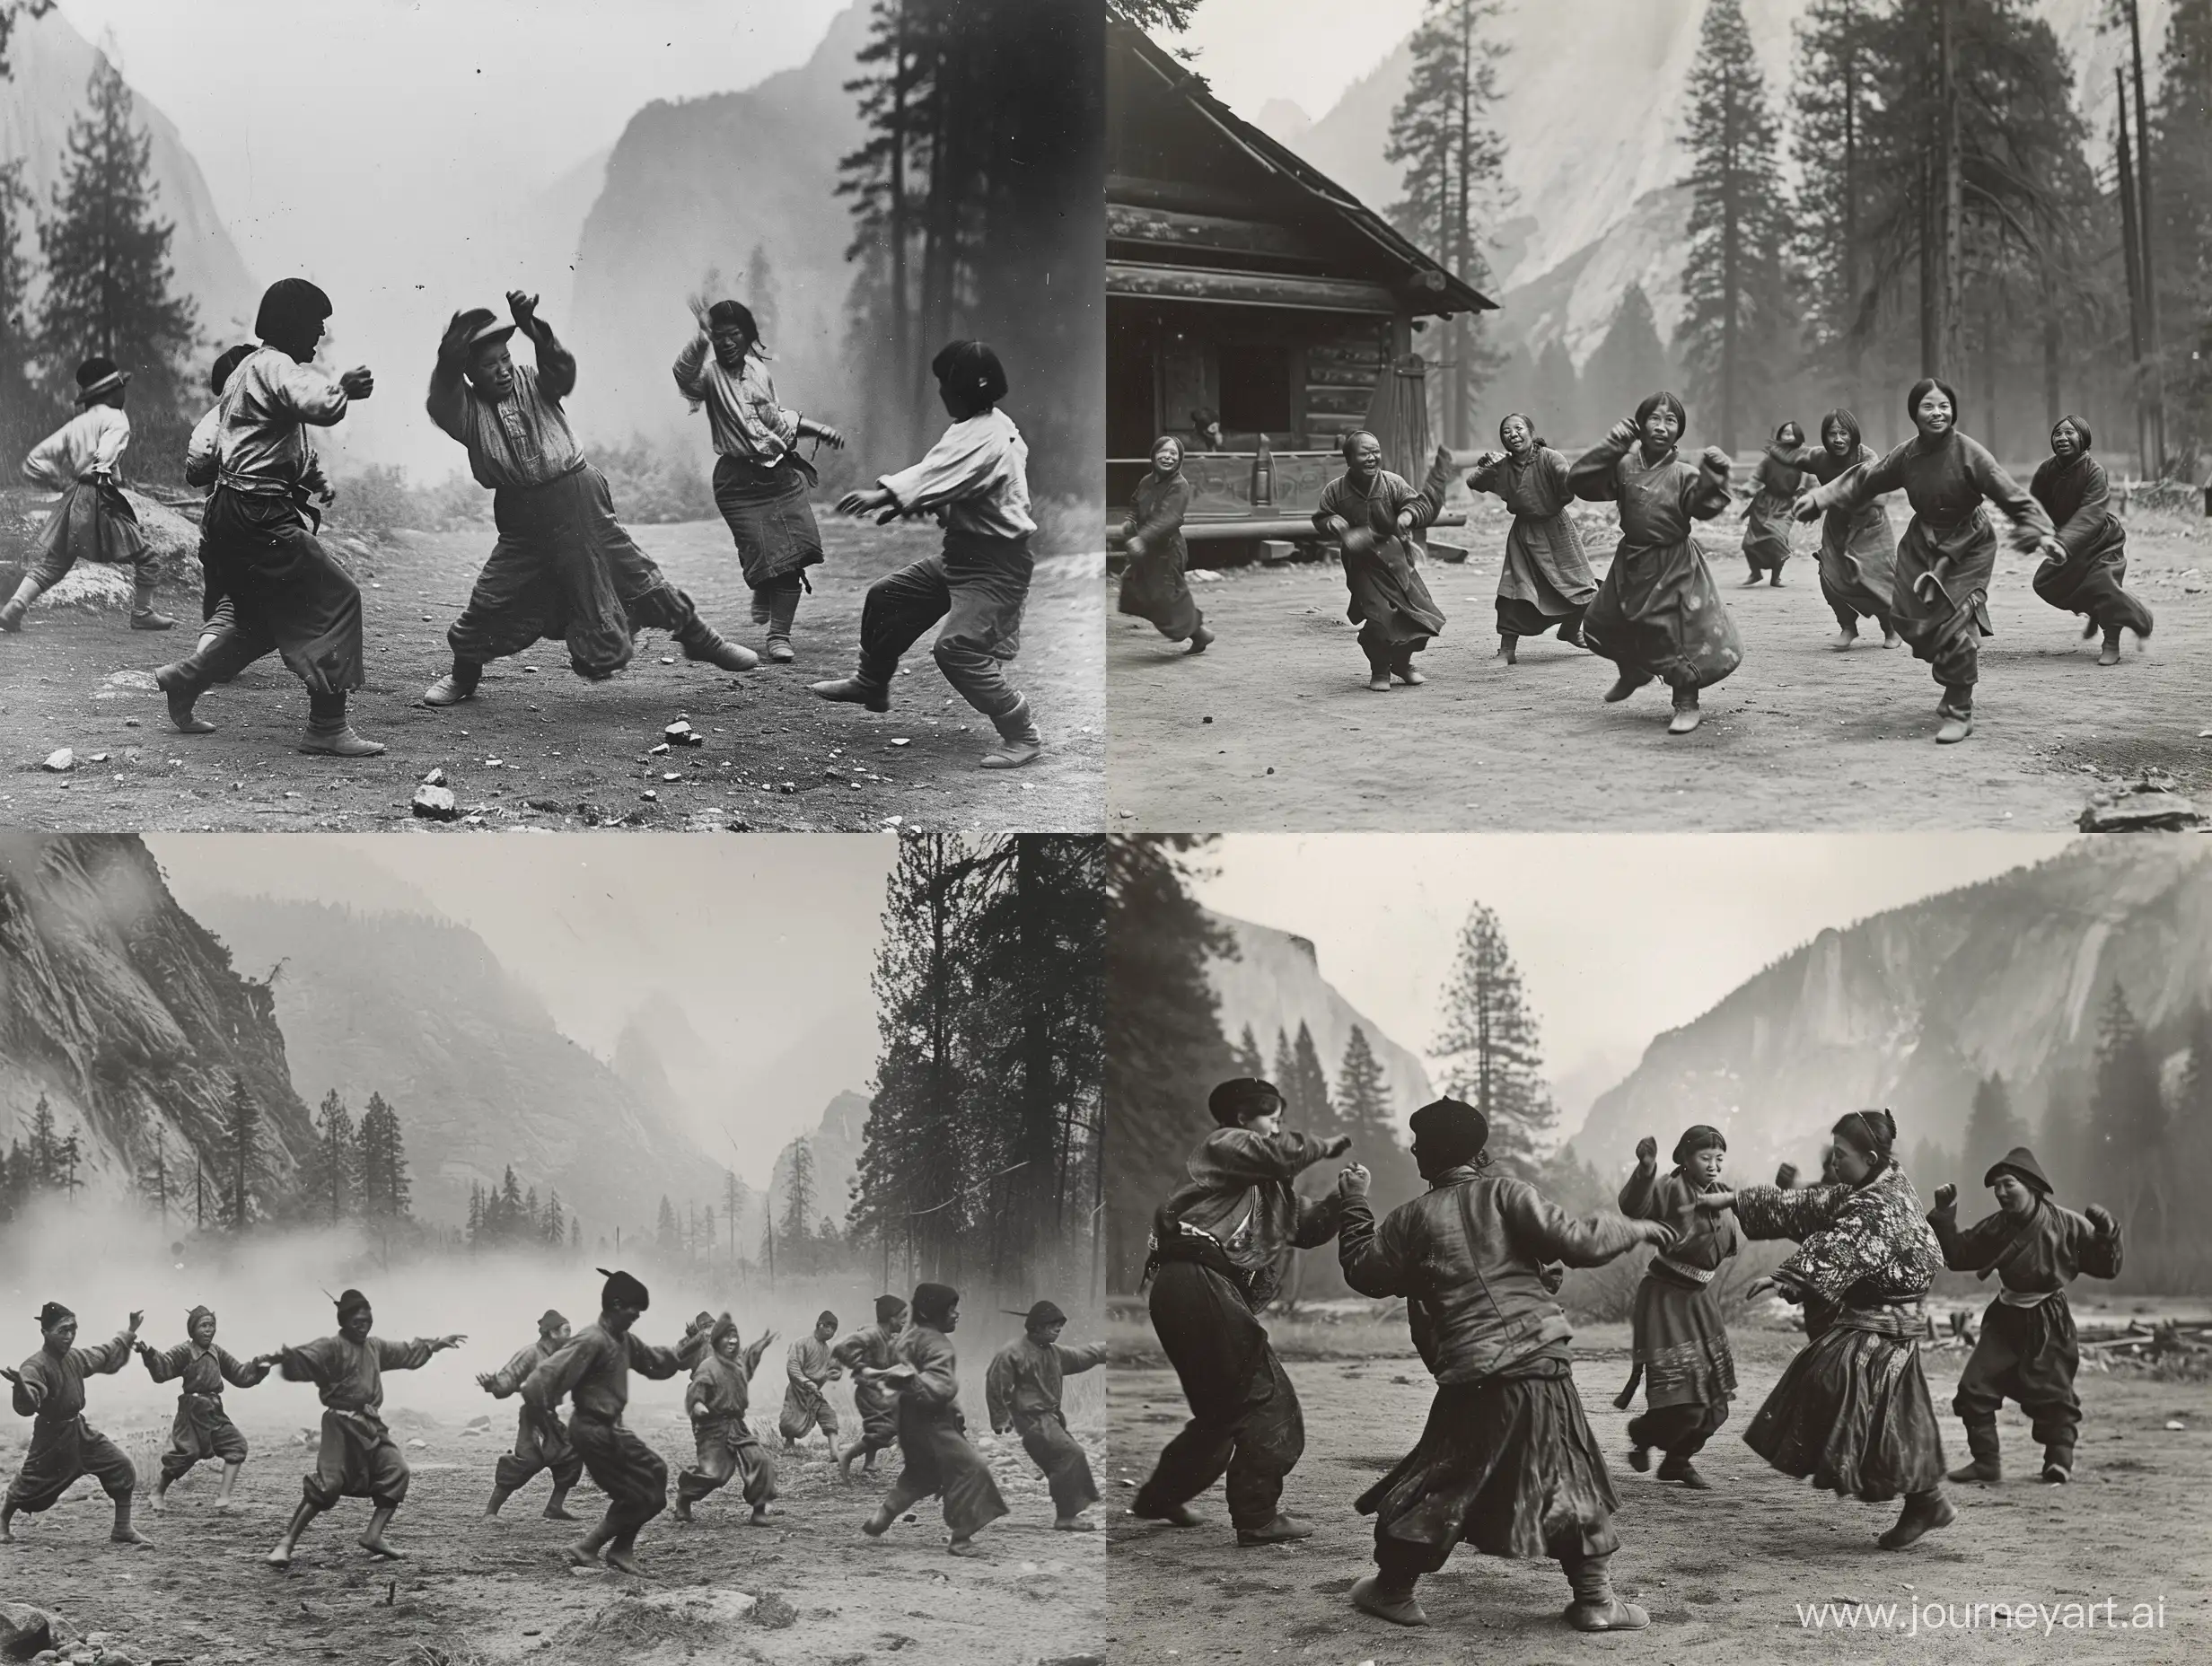 Historical black and white photographs dipicting the life of Chinese workers dancing at Yosemite in the late 1800s.
